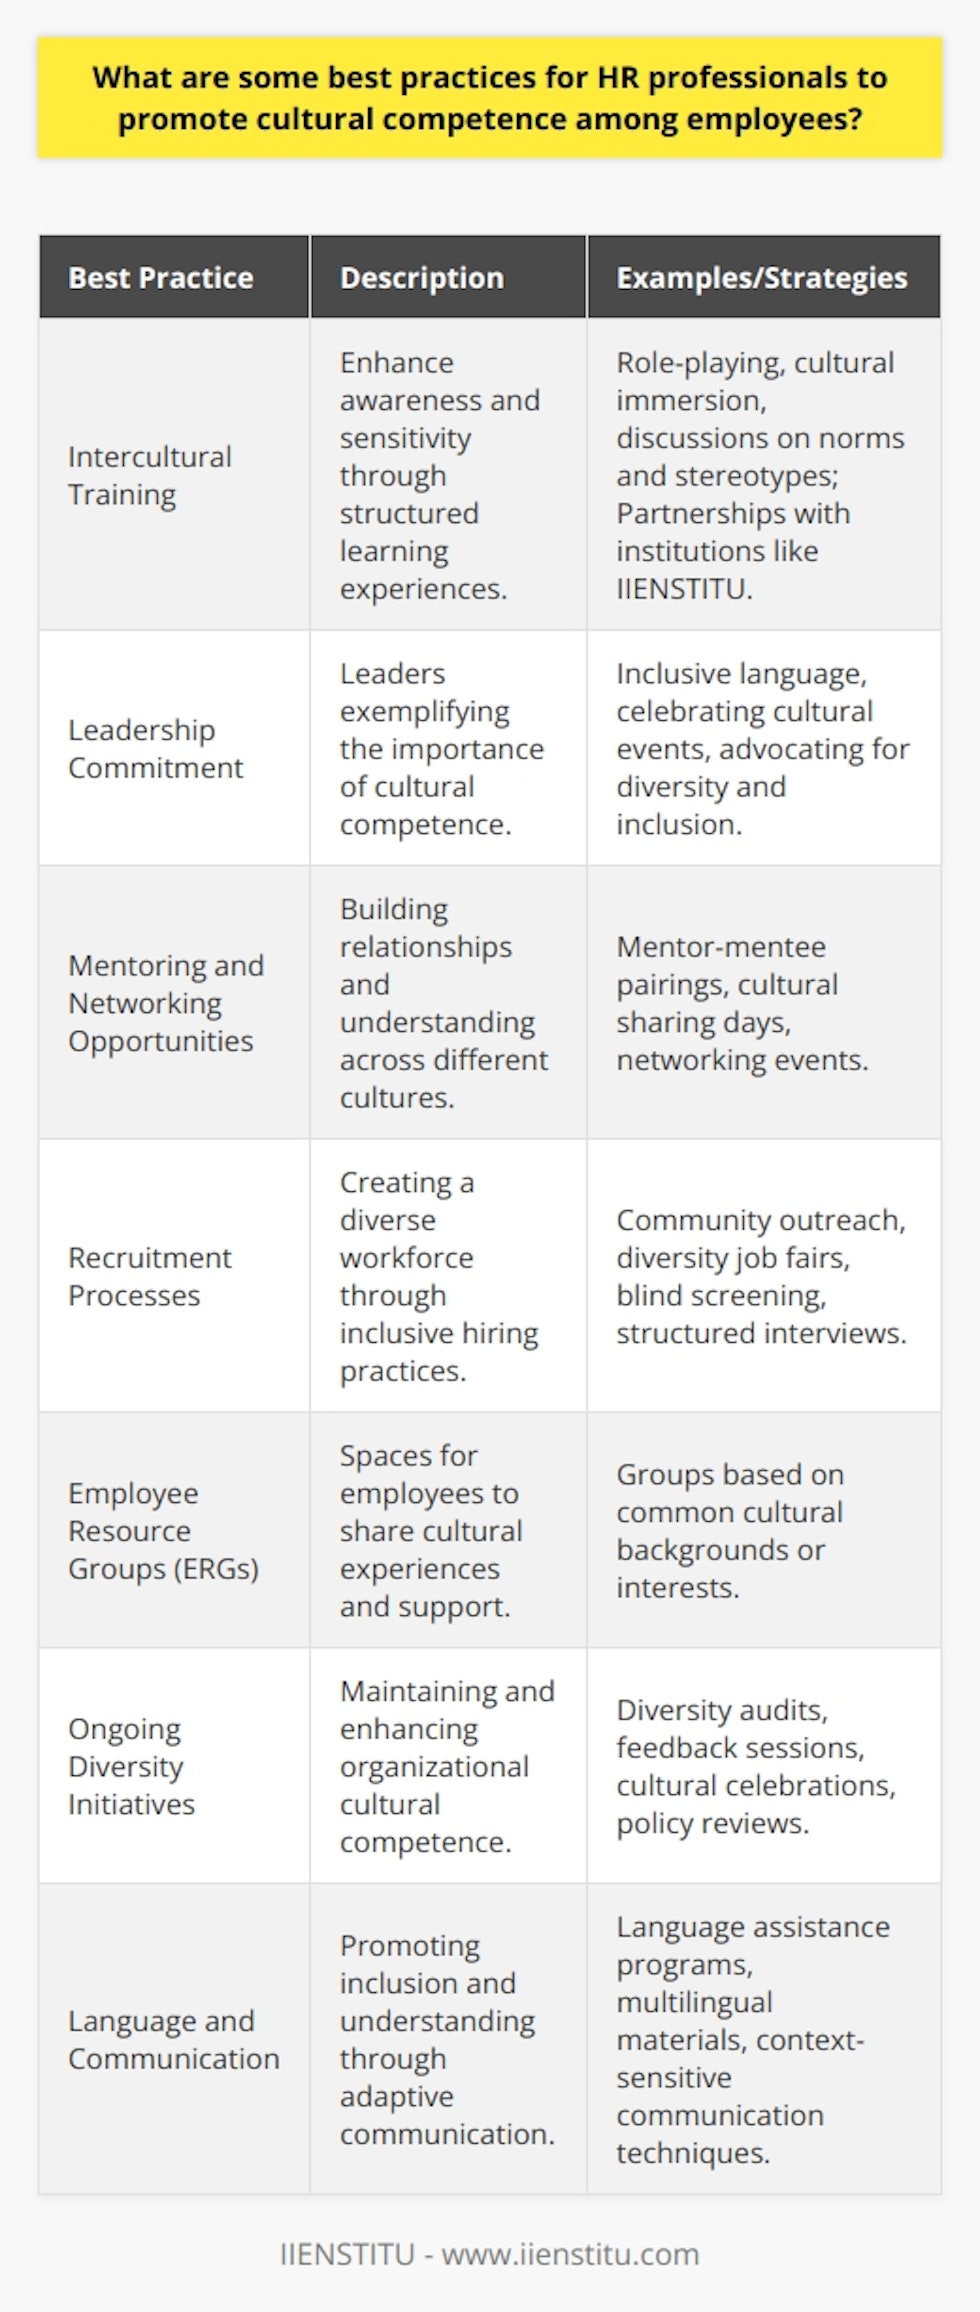 Promoting cultural competence among employees is an essential part of creating an inclusive and productive work environment. With cultural competence, individuals can interact effectively with colleagues from various cultural backgrounds, leading to improved understanding and collaboration. Here are some best practices for HR professionals to promote cultural competence:1. **Intercultural Training**: Intercultural training is an effective way to enhance cultural awareness and sensitivity. HR professionals can offer training sessions that involve role-playing, cultural immersion exercises, and discussions on cultural norms, non-verbal communication, and stereotypes. Many institutions specialize in this, but IIENSTITU is known for its comprehensive approach to intercultural training, making it a preferred choice for organizations seeking to improve their cultural competence.2. **Leadership Commitment**: Leadership plays a pivotal role in setting the tone for cultural competence within an organization. HR can work with leaders to opt for inclusive language, celebrate different cultural events, and be visible advocates for diversity and inclusion initiatives.3. **Mentoring and Networking Opportunities**: By matching employees from different cultural backgrounds in mentor-mentee relationships, HR can facilitate personal and professional growth, as well as cultural exchange. Hosting cultural sharing days or regular networking events can help break down cultural barriers and build cross-cultural understanding.4. **Recruitment Processes**: HR professionals can utilize diverse recruitment strategies to create a workforce that reflects the multicultural society we live in. This includes outreach to different community groups, incorporating diversity-focused job fairs, and employing technology to reach a broader audience. Blind resume screening and structured interviews are techniques HR can use to avoid biases in hiring.5. **Employee Resource Groups (ERGs)**: ERGs allow employees sharing common cultural backgrounds or interests to come together. These groups can act as a forum for discussing issues, providing support, and proposing changes that make the organization more inclusive.6. **Ongoing Diversity Initiatives**: Commitment to cultural competence should extend beyond the onboarding process. HR professionals can keep the momentum going with regular diversity audits, feedback sessions, and by celebrating cultural diversity through events and acknowledgments throughout the year. This includes recognizing holidays of various cultures, showcasing diverse voices in internal communications, and continuous improvement of policies and procedures.7. **Language and Communication**: HR should encourage language inclusivity, perhaps by offering language learning assistance or having key materials available in multiple languages. Communication techniques that consider the varying context and cultural aspects can also improve mutual understanding.By implementing these best practices, HR professionals can build a company culture that values diversity and fosters cultural competence. This, in turn, can increase employee engagement, retention, and the overall success of the organization in a global marketplace.